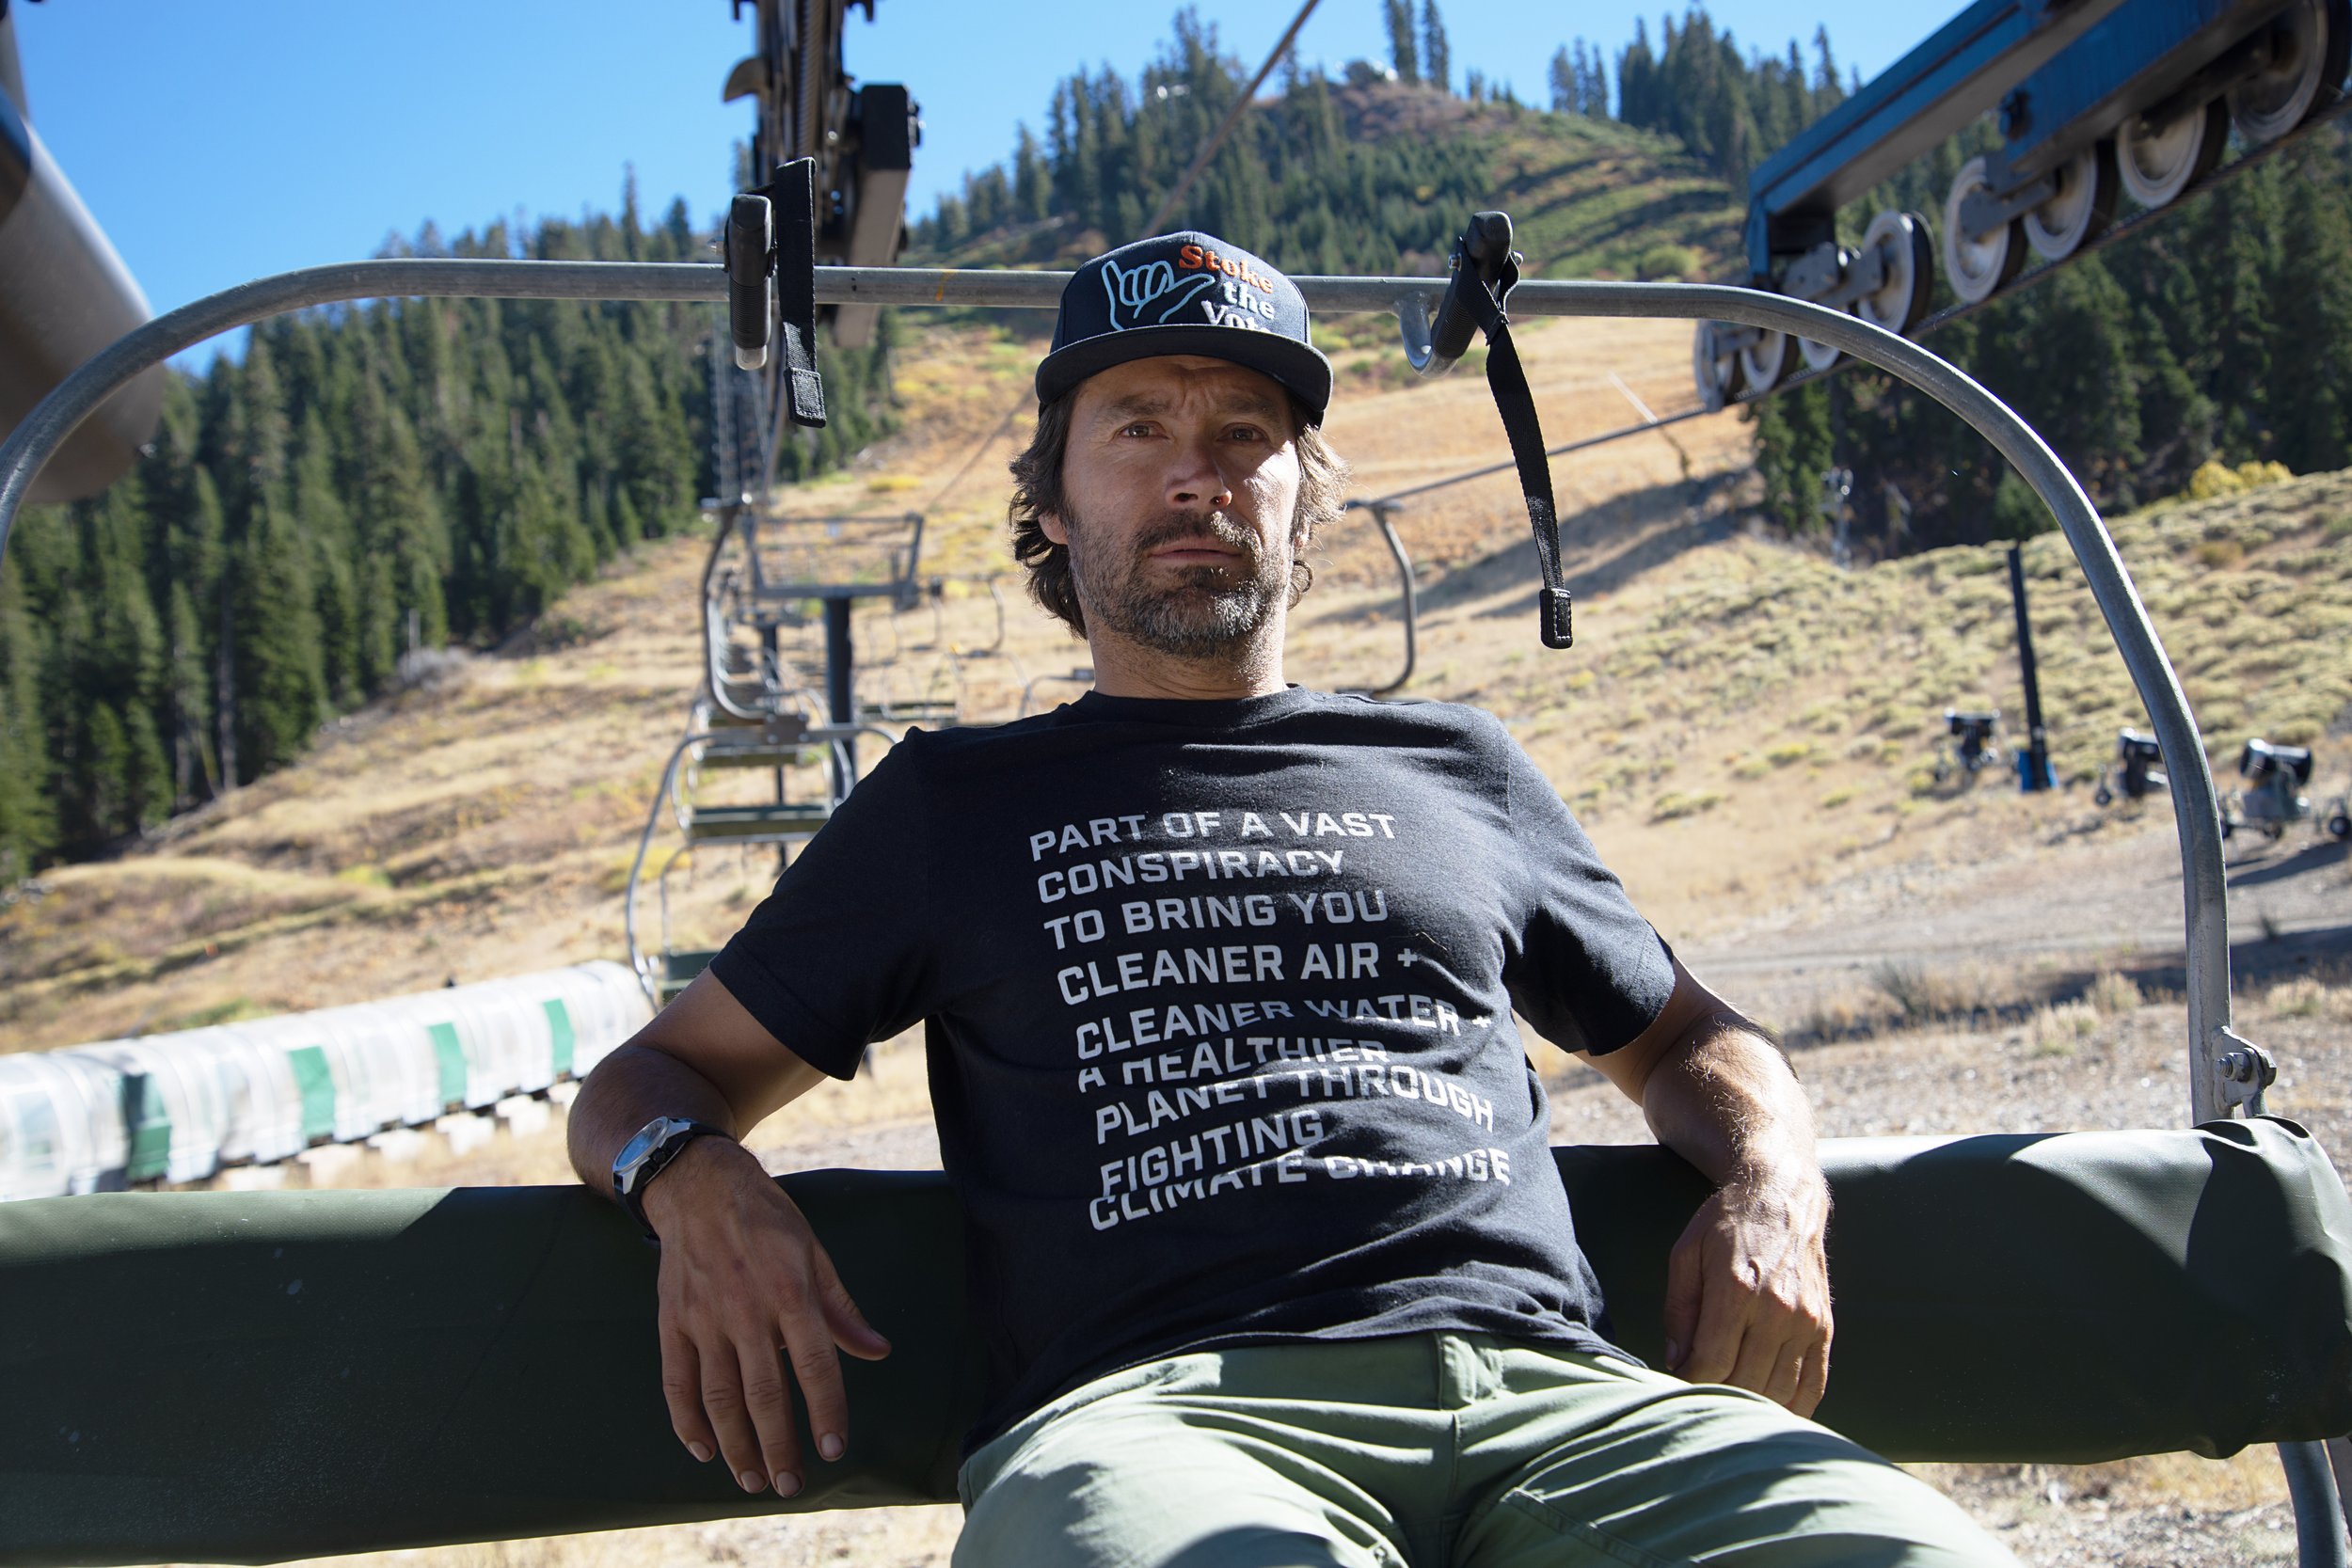  Professional snowboarder Jeremy Jones uses his platform to confront misinformation from climate deniers and created the non-profit Protect Our Winters (POW) in 2007. Jones poses for a portrait here at his home resort, Palisades Tahoe, on Oct. 14, 20